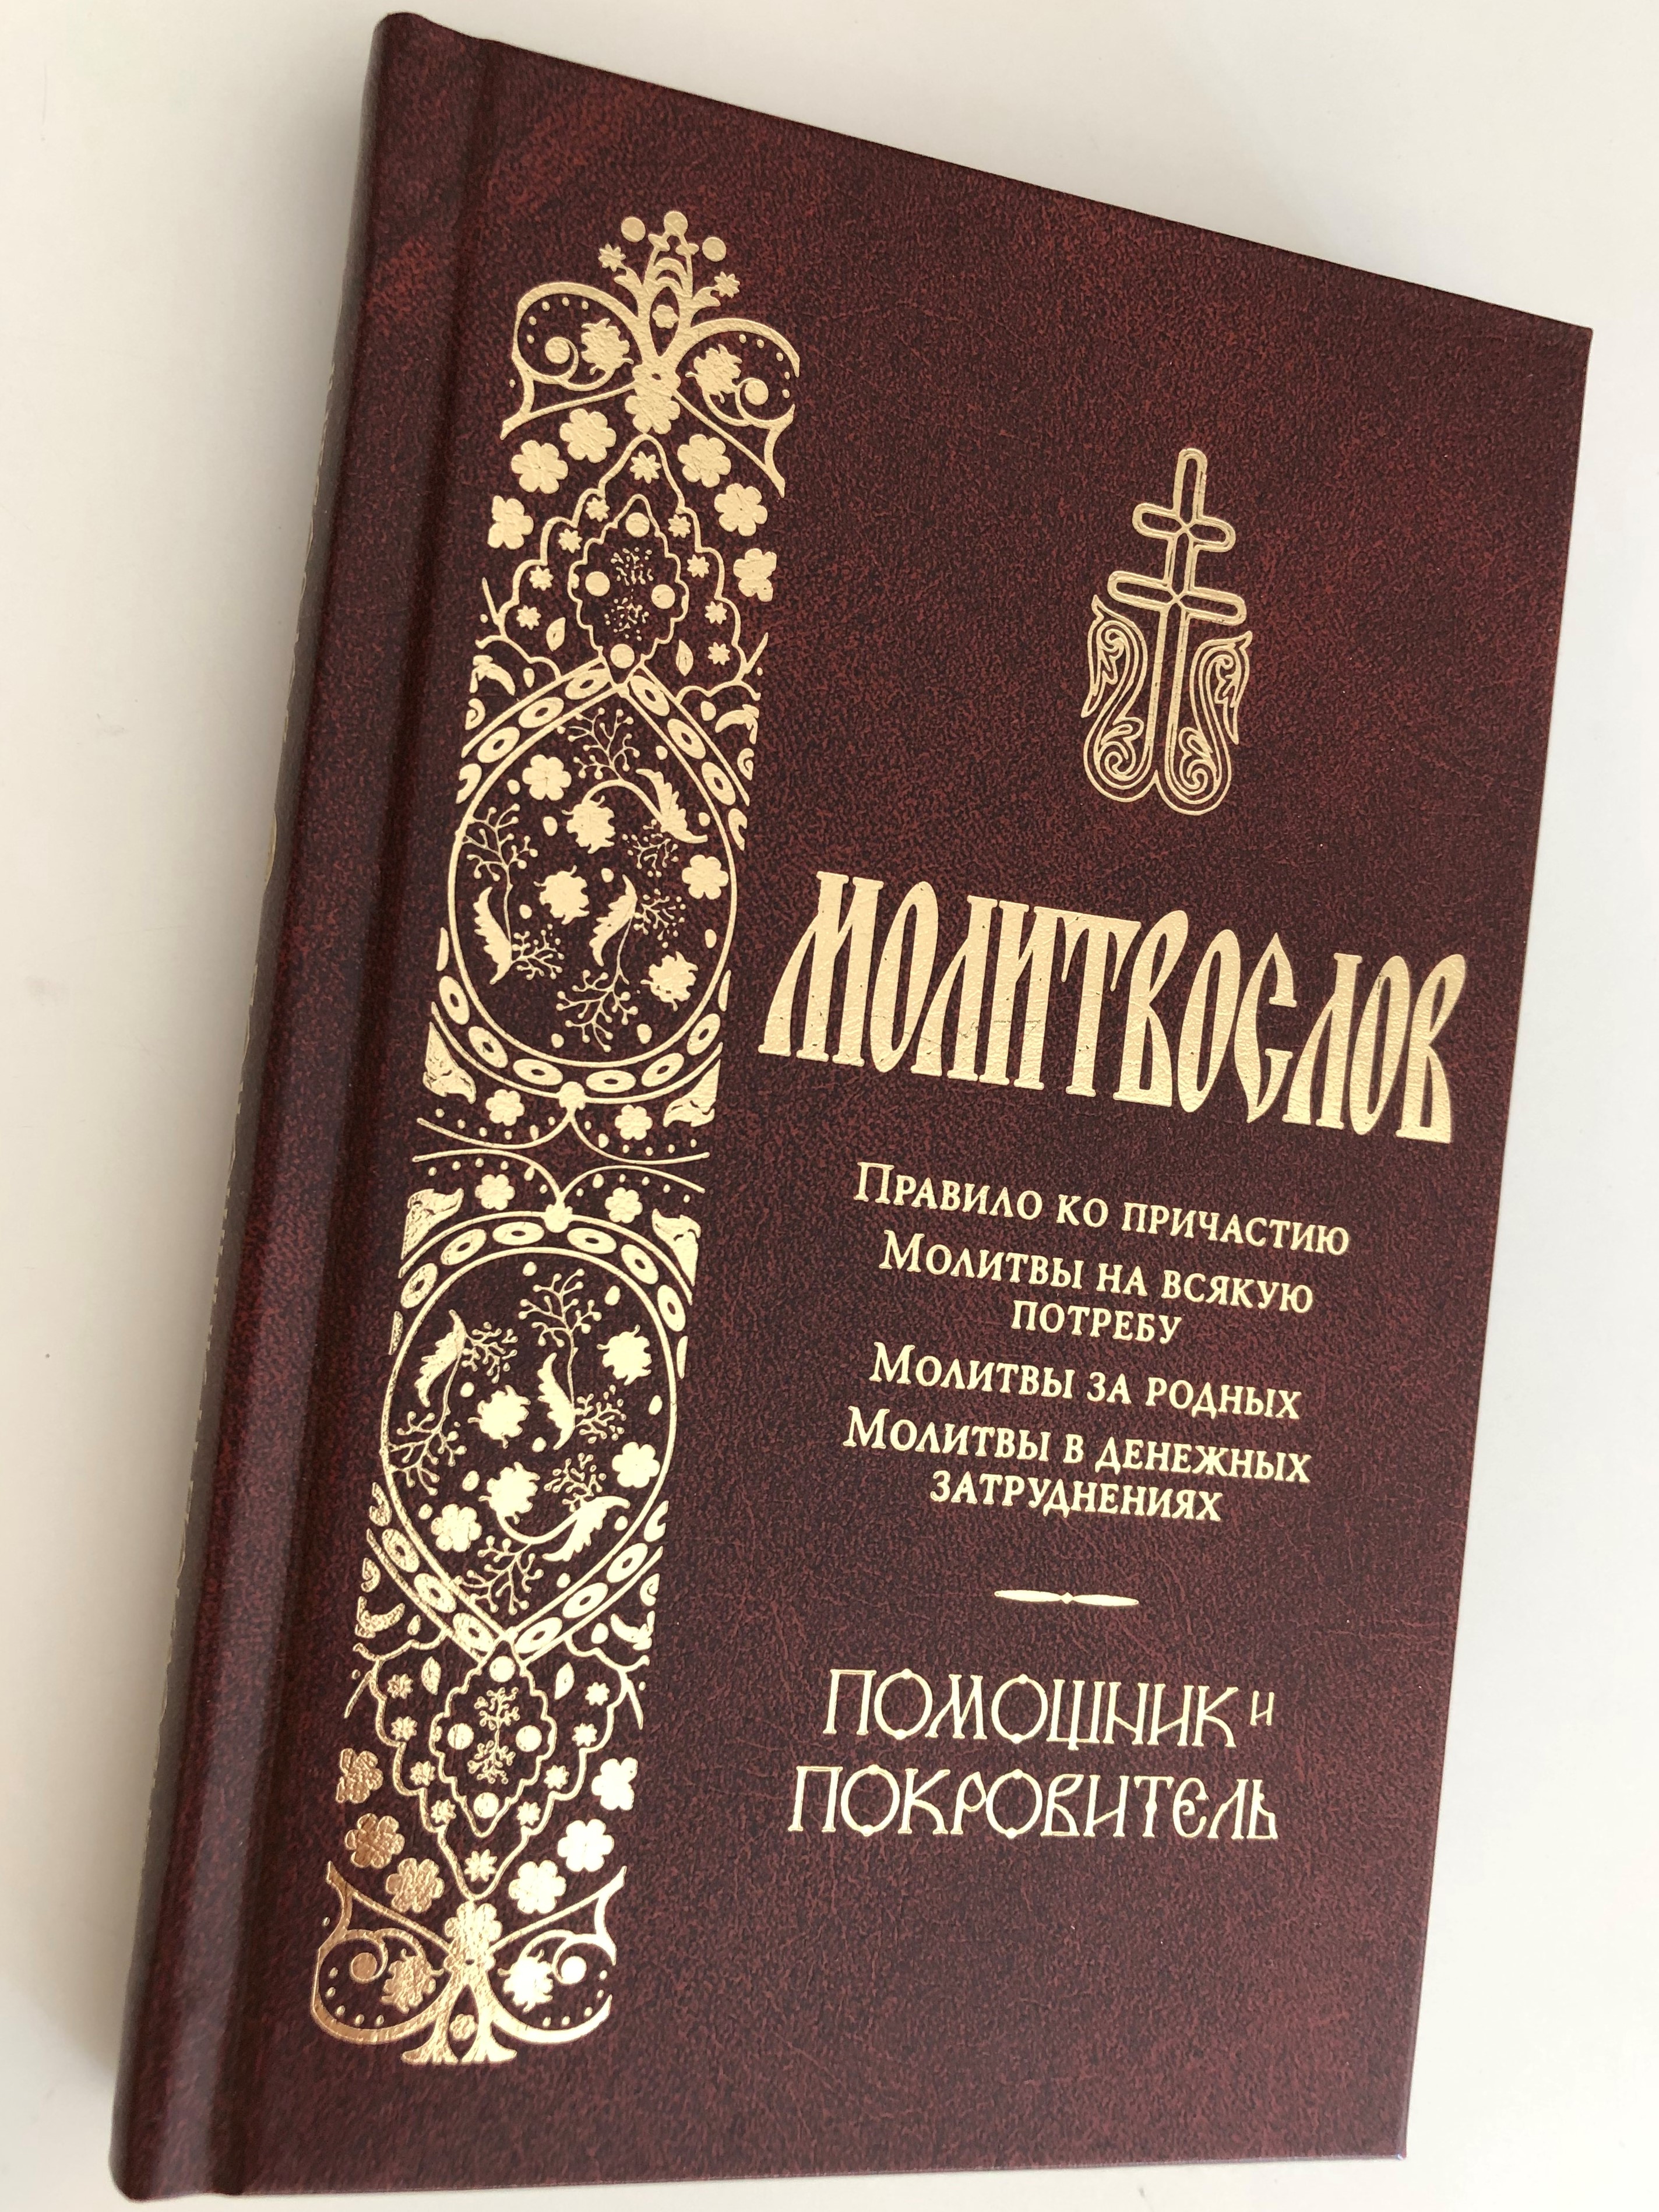 russian-language-prayer-book-communion-rule-prayers-for-every-need-prayers-for-relatives-prayers-for-monetary-problems-terirem-2016-1-.jpg